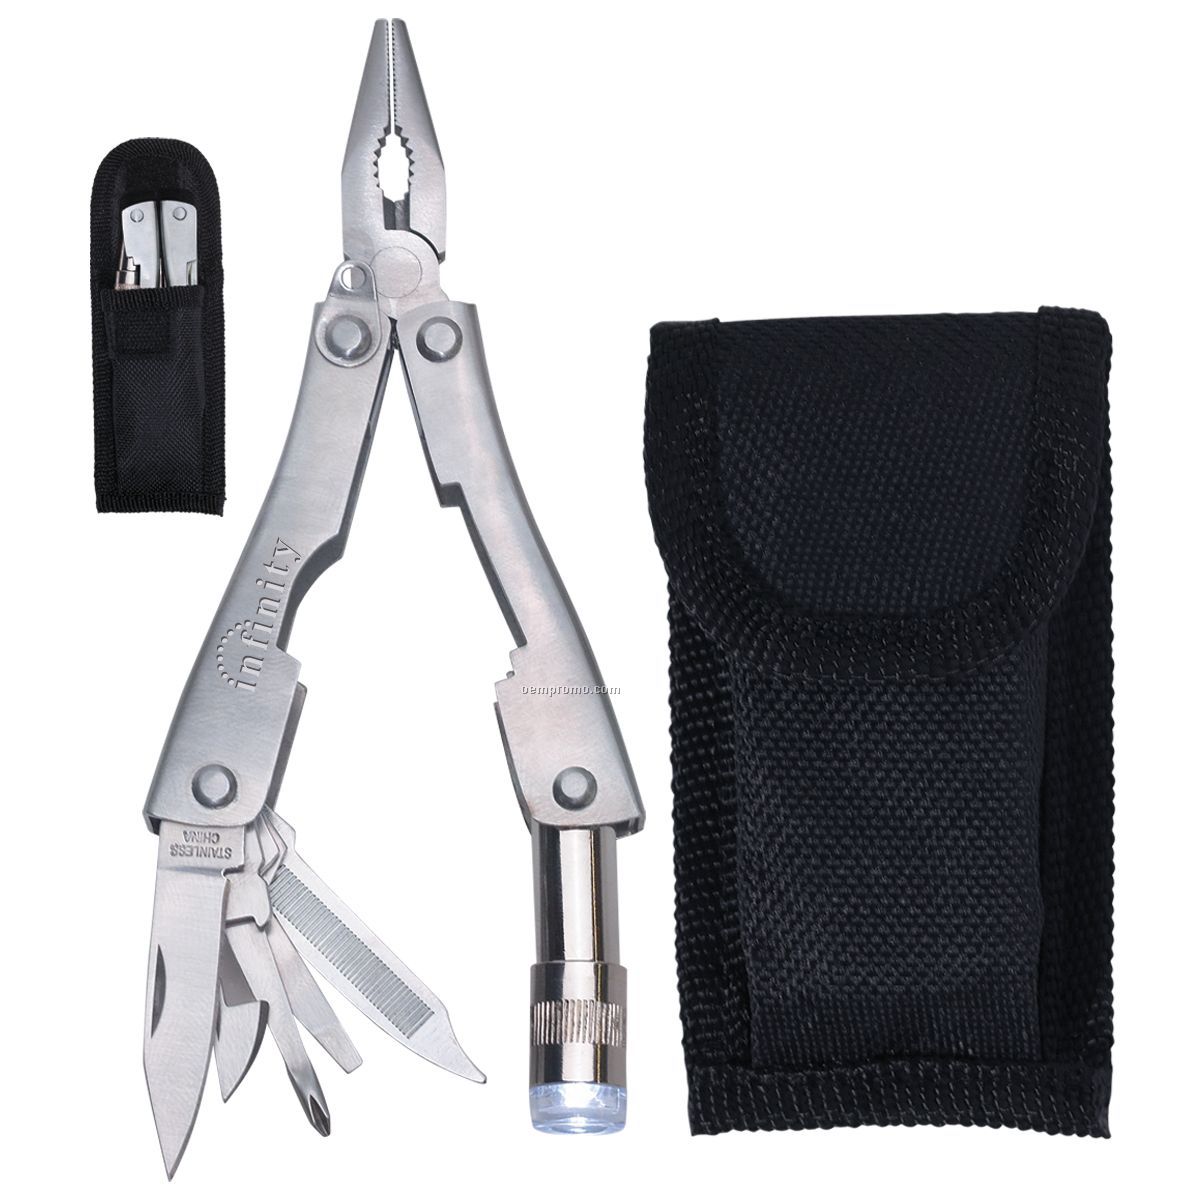 Metal Multi-function Pliers W/ Tools And Flashlight In Case